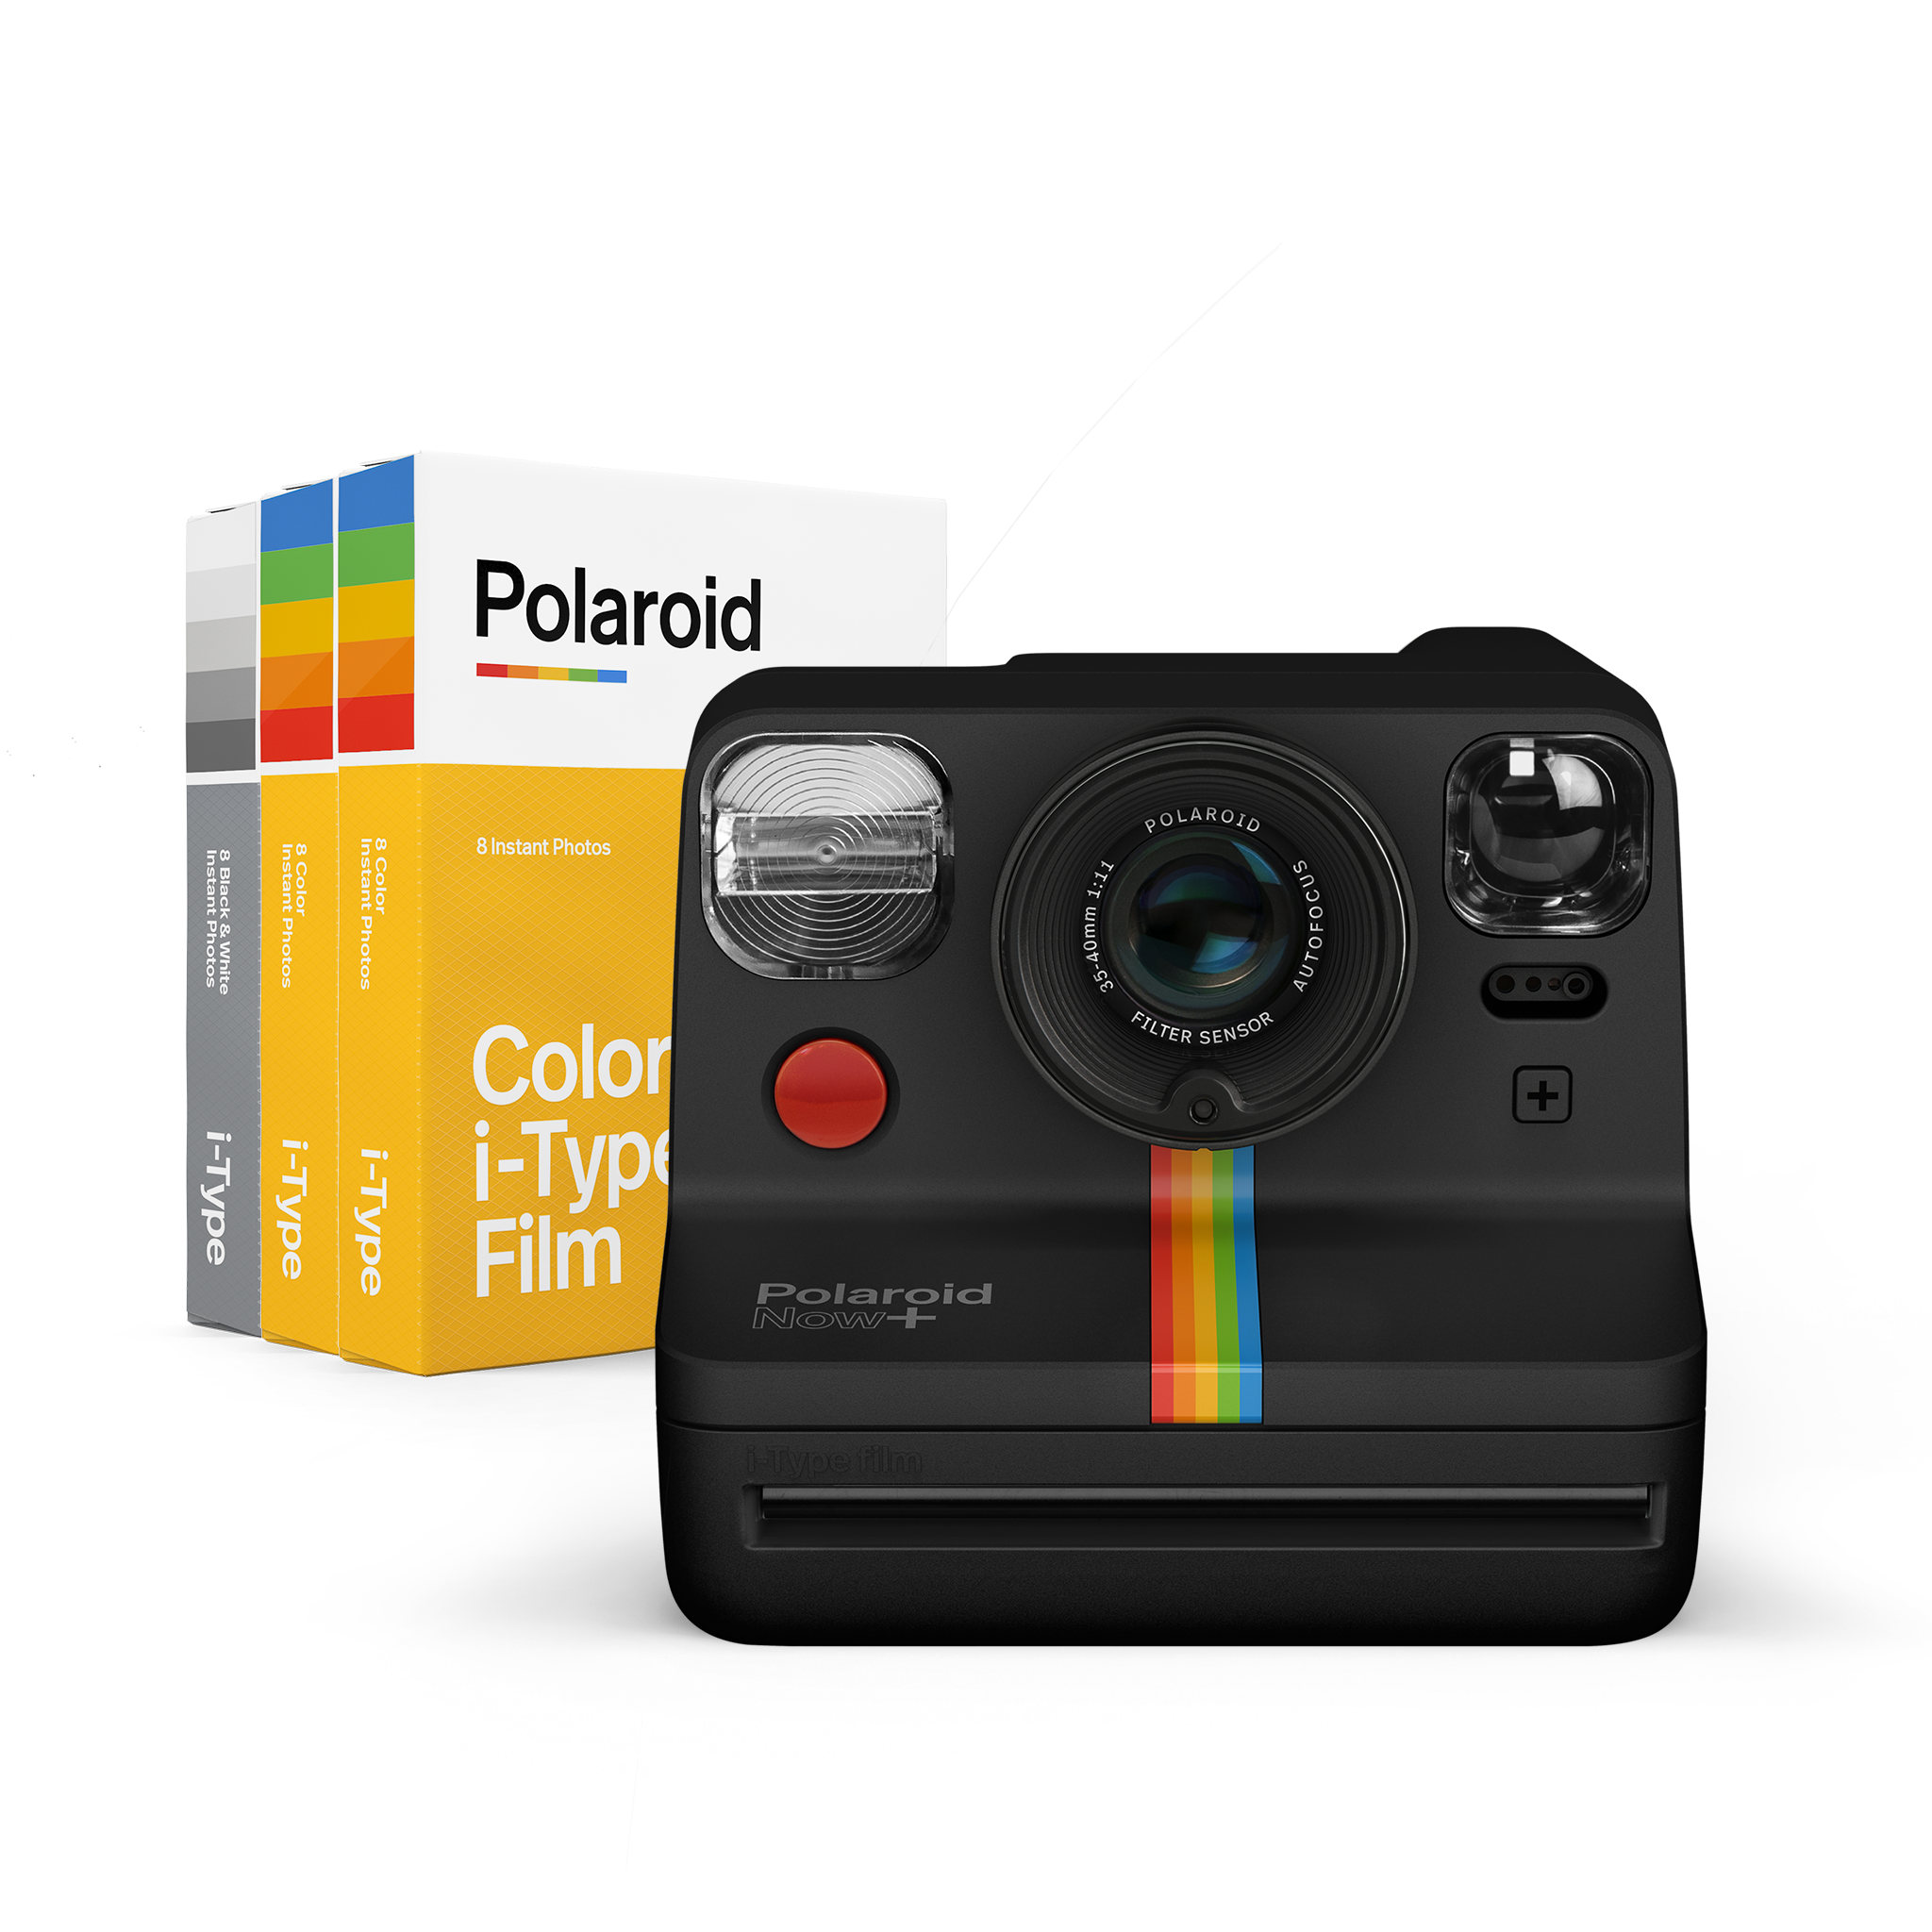 Polaroid Us | Official Online Store